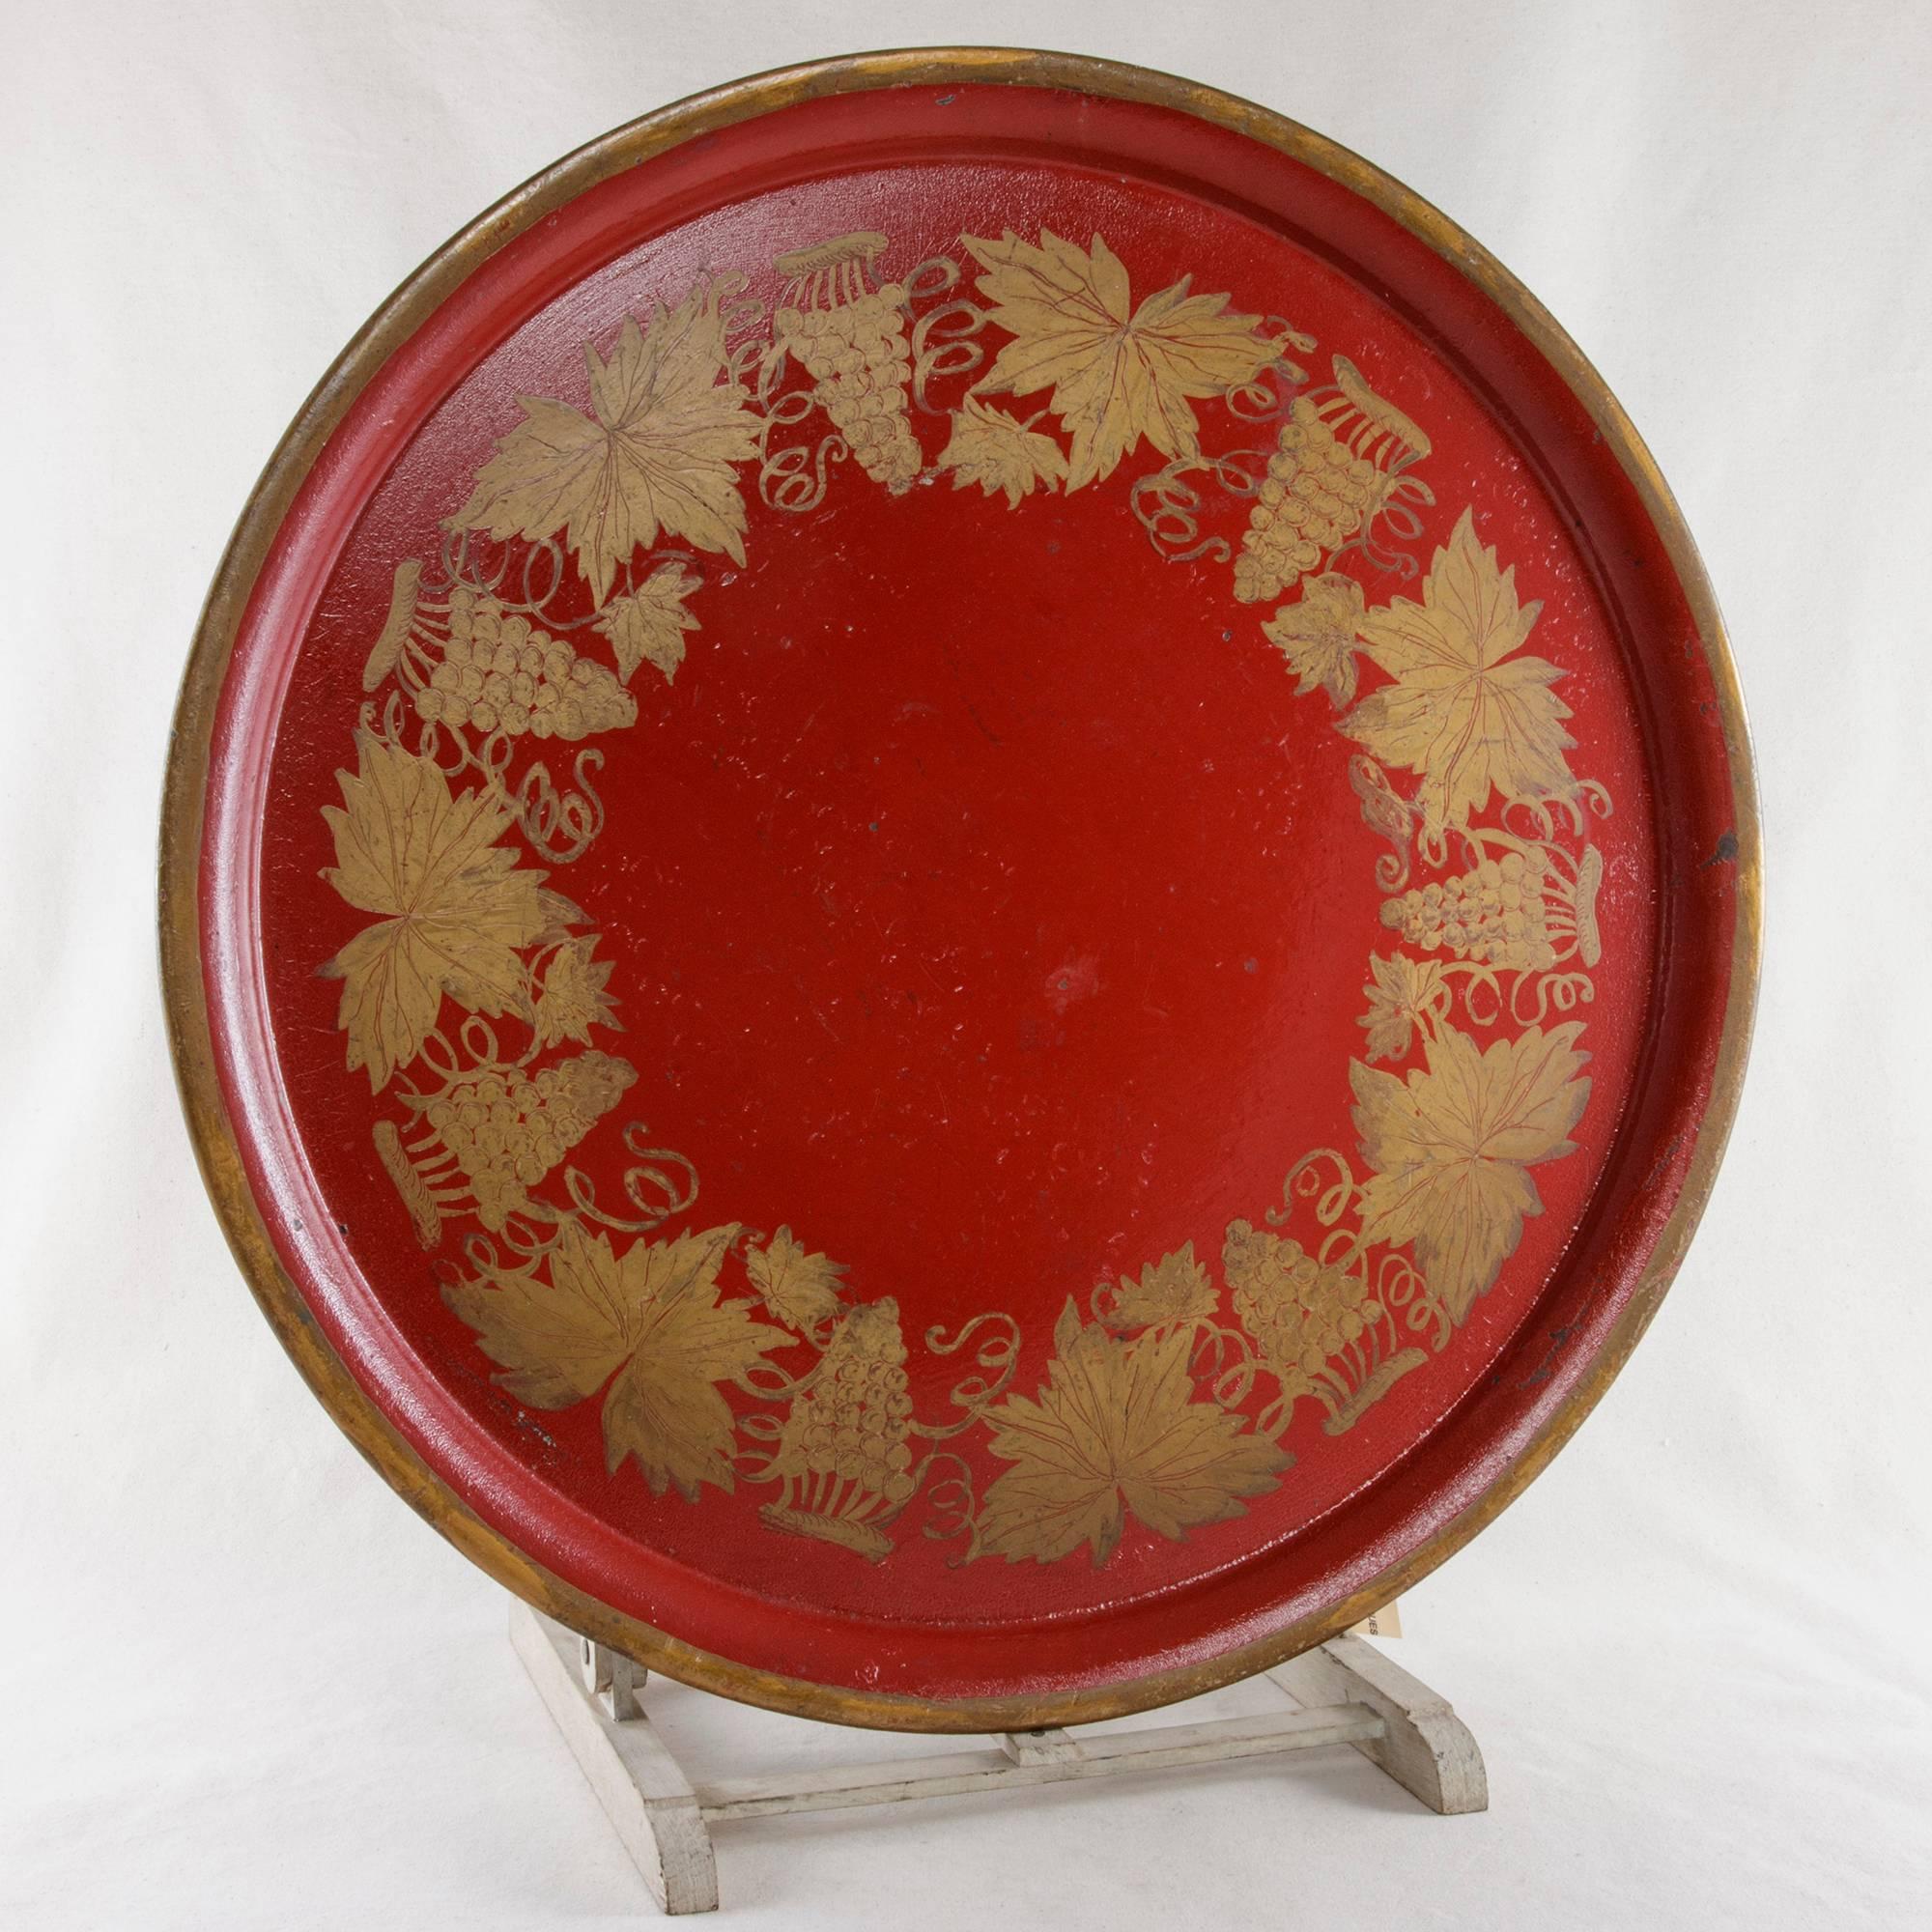 This Napoleon III period tole tray features a red background with hand-painted gold grapes, grape leaves and vines around the inside perimeter and a gold border around the outer edge. The black back is signed A. Dereaune, Paris. An ideal decorative